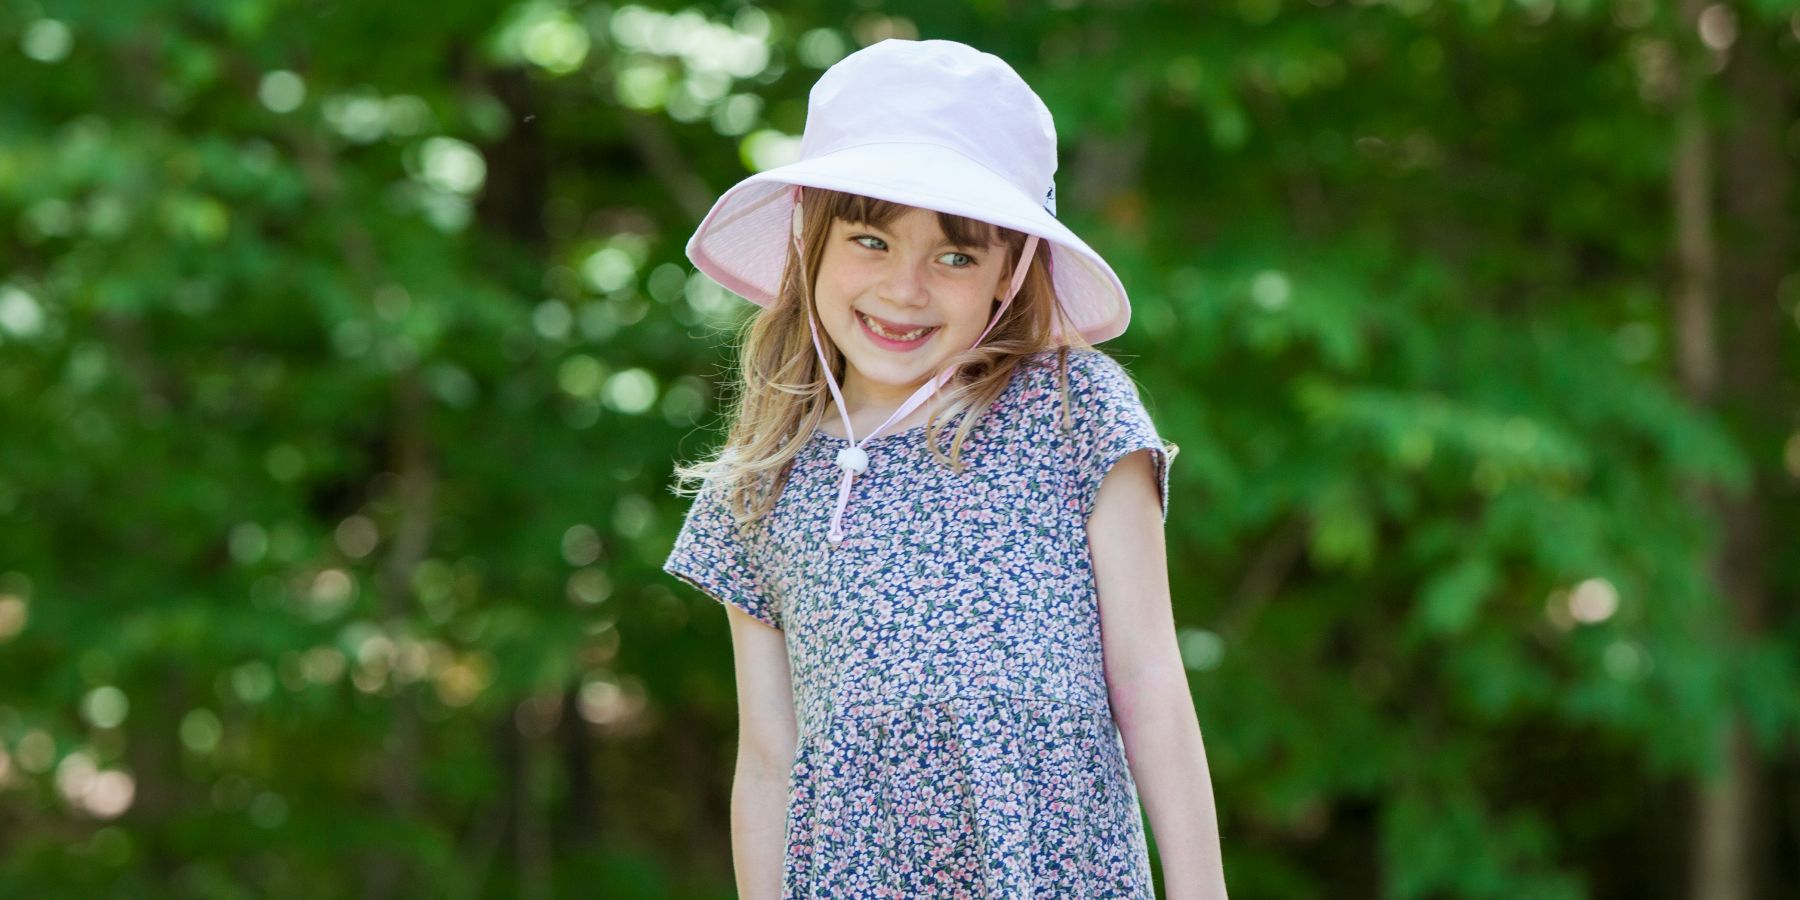 Kids UPF50 Wide Brim Sunbaby Hat with UPF50 Excellent Sun Protection Rating.  This means it blocks at least 97.5% UVA and UVB radiation.  Prewashed, Machine Washable. Made in Canada by Puffin Gear